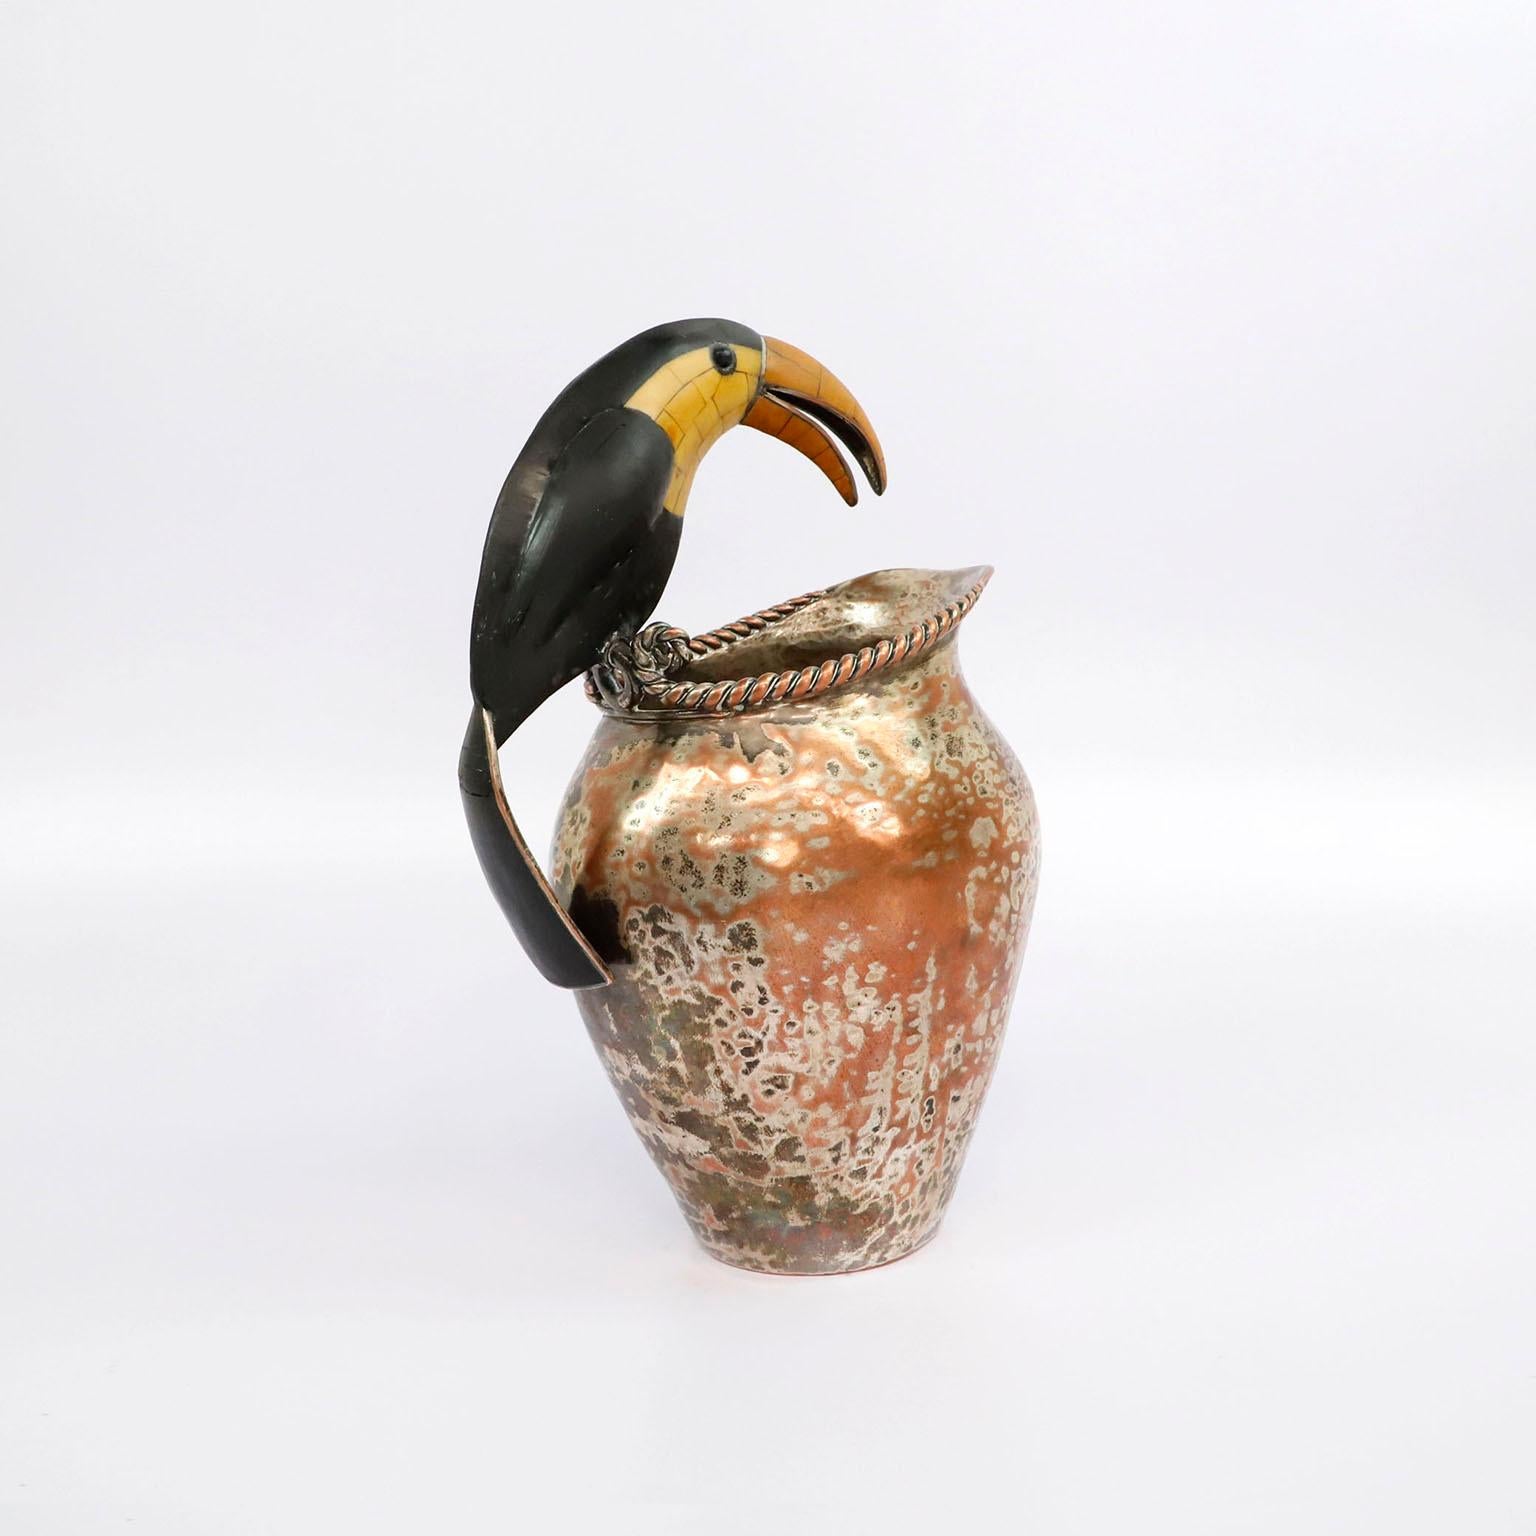 Circa 1960. We offer this Mid-Century Mexican pitcher with toucan handle by Emilia Castillo with toucan handle in great vintage condition and fantastic patina. This is an exquisite and monumental pitcher, the patina adds character but can be